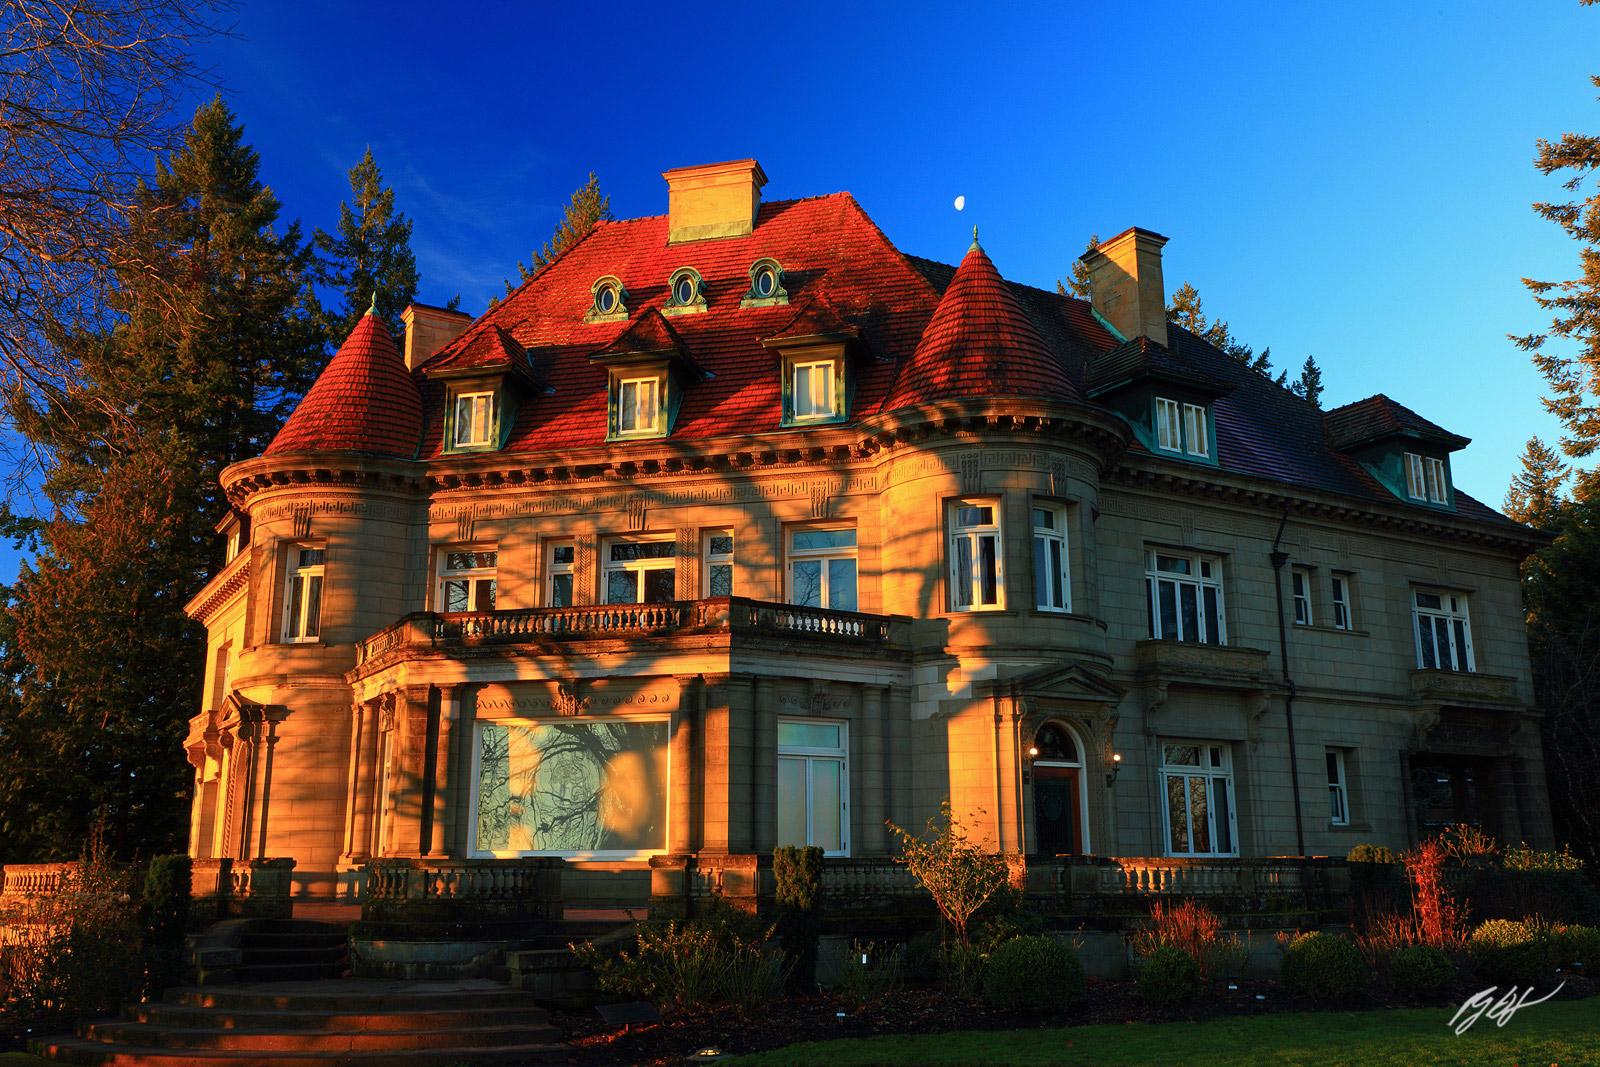 The Pittock Mansion is a French Renaissance-style château in the West Hills of Portland, Oregon